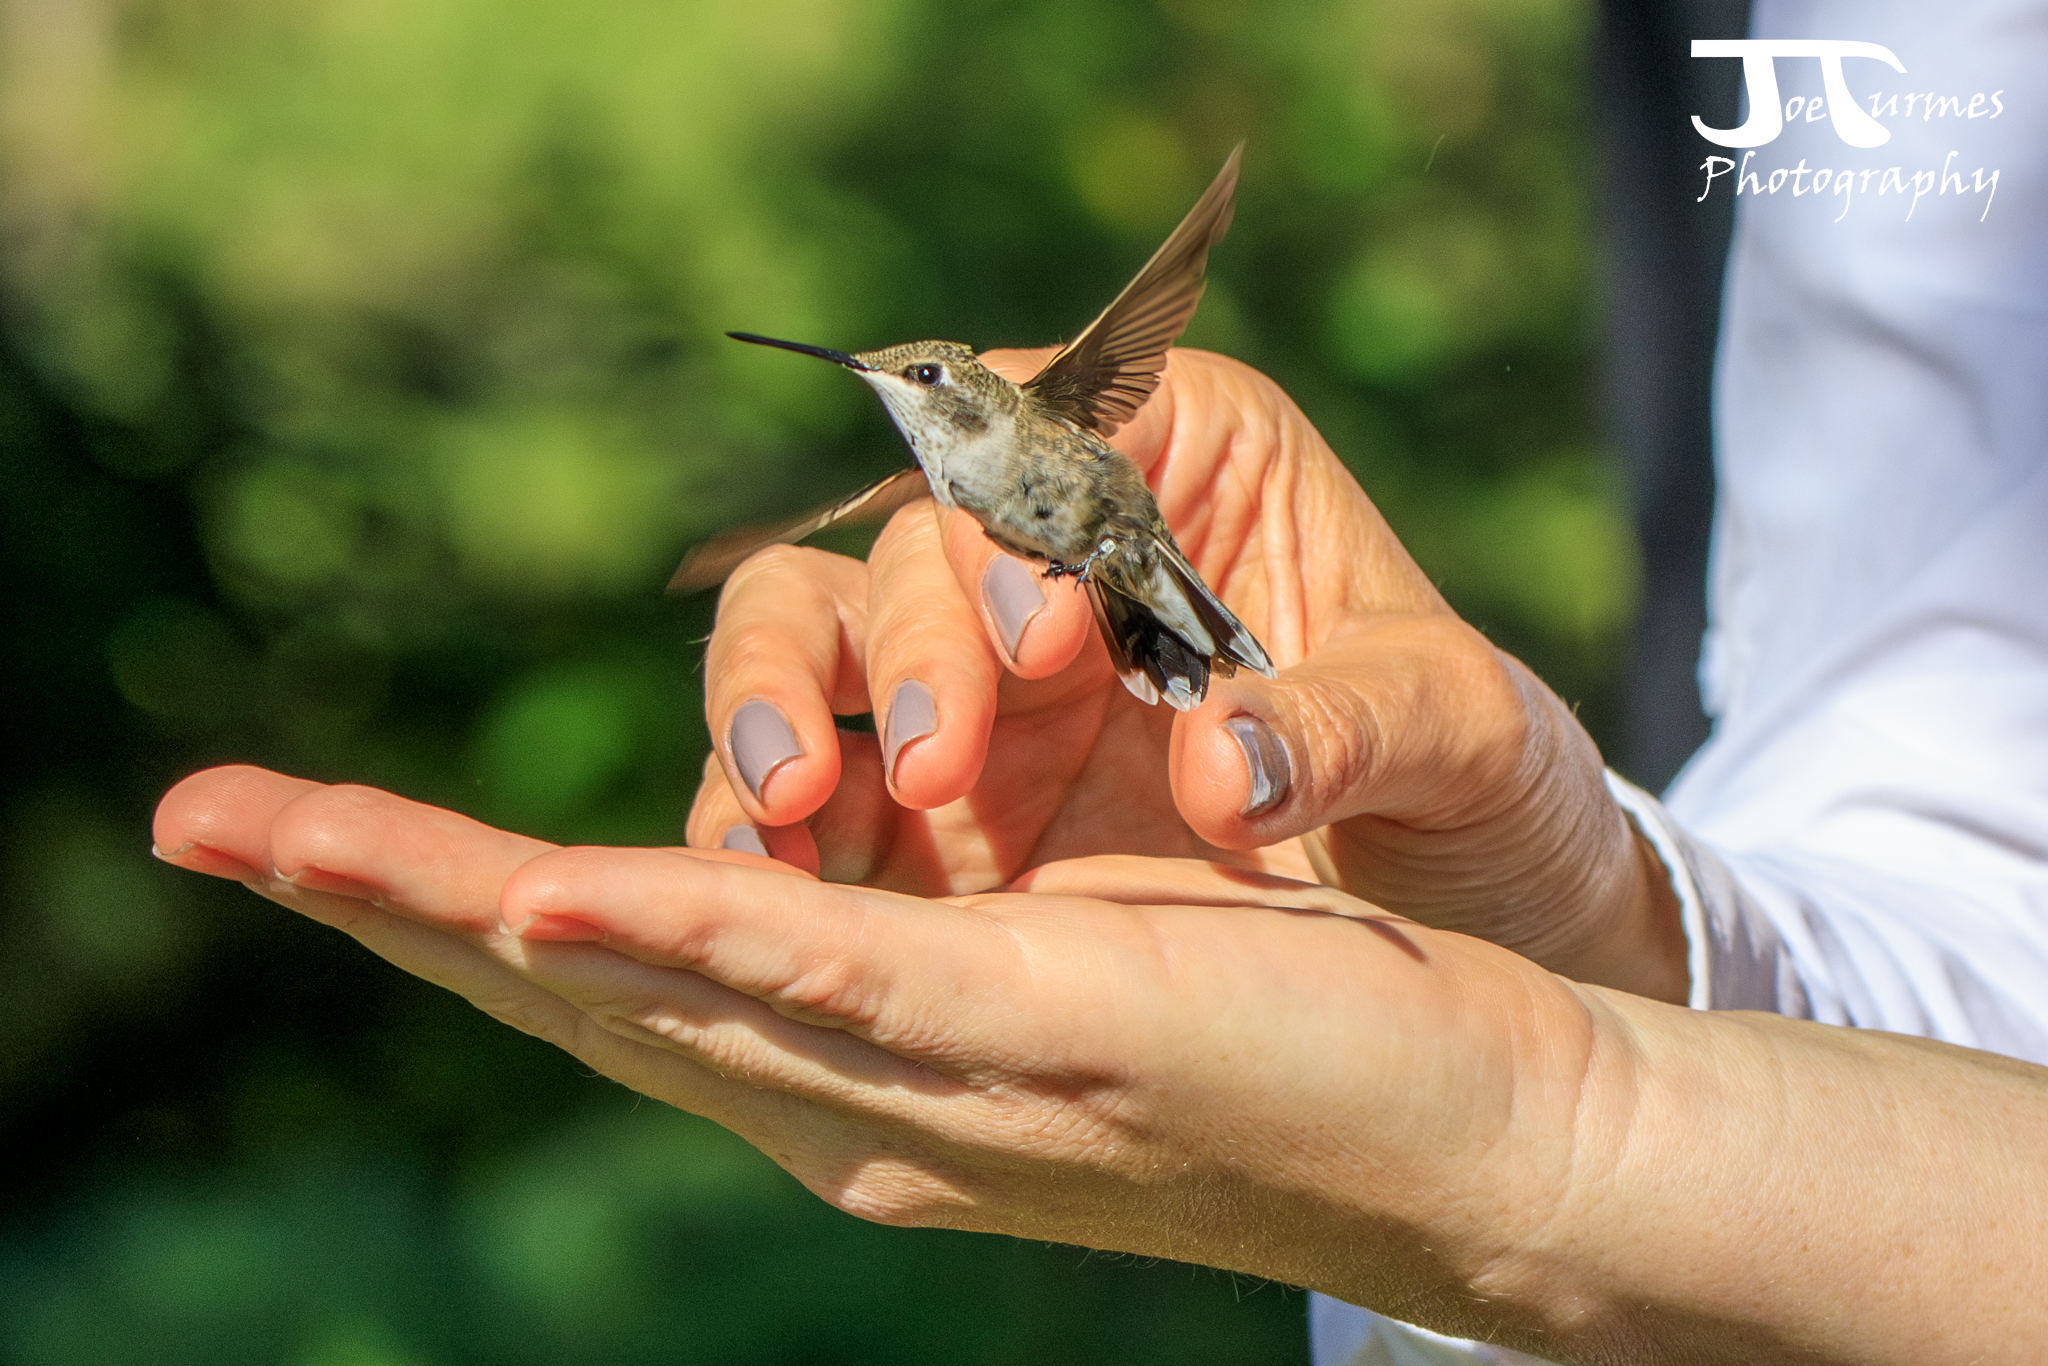 a small grayish hummingbird hovers in flight just over a person's outstretched palm. The photo was taken the moment the bird took off from the person's hand